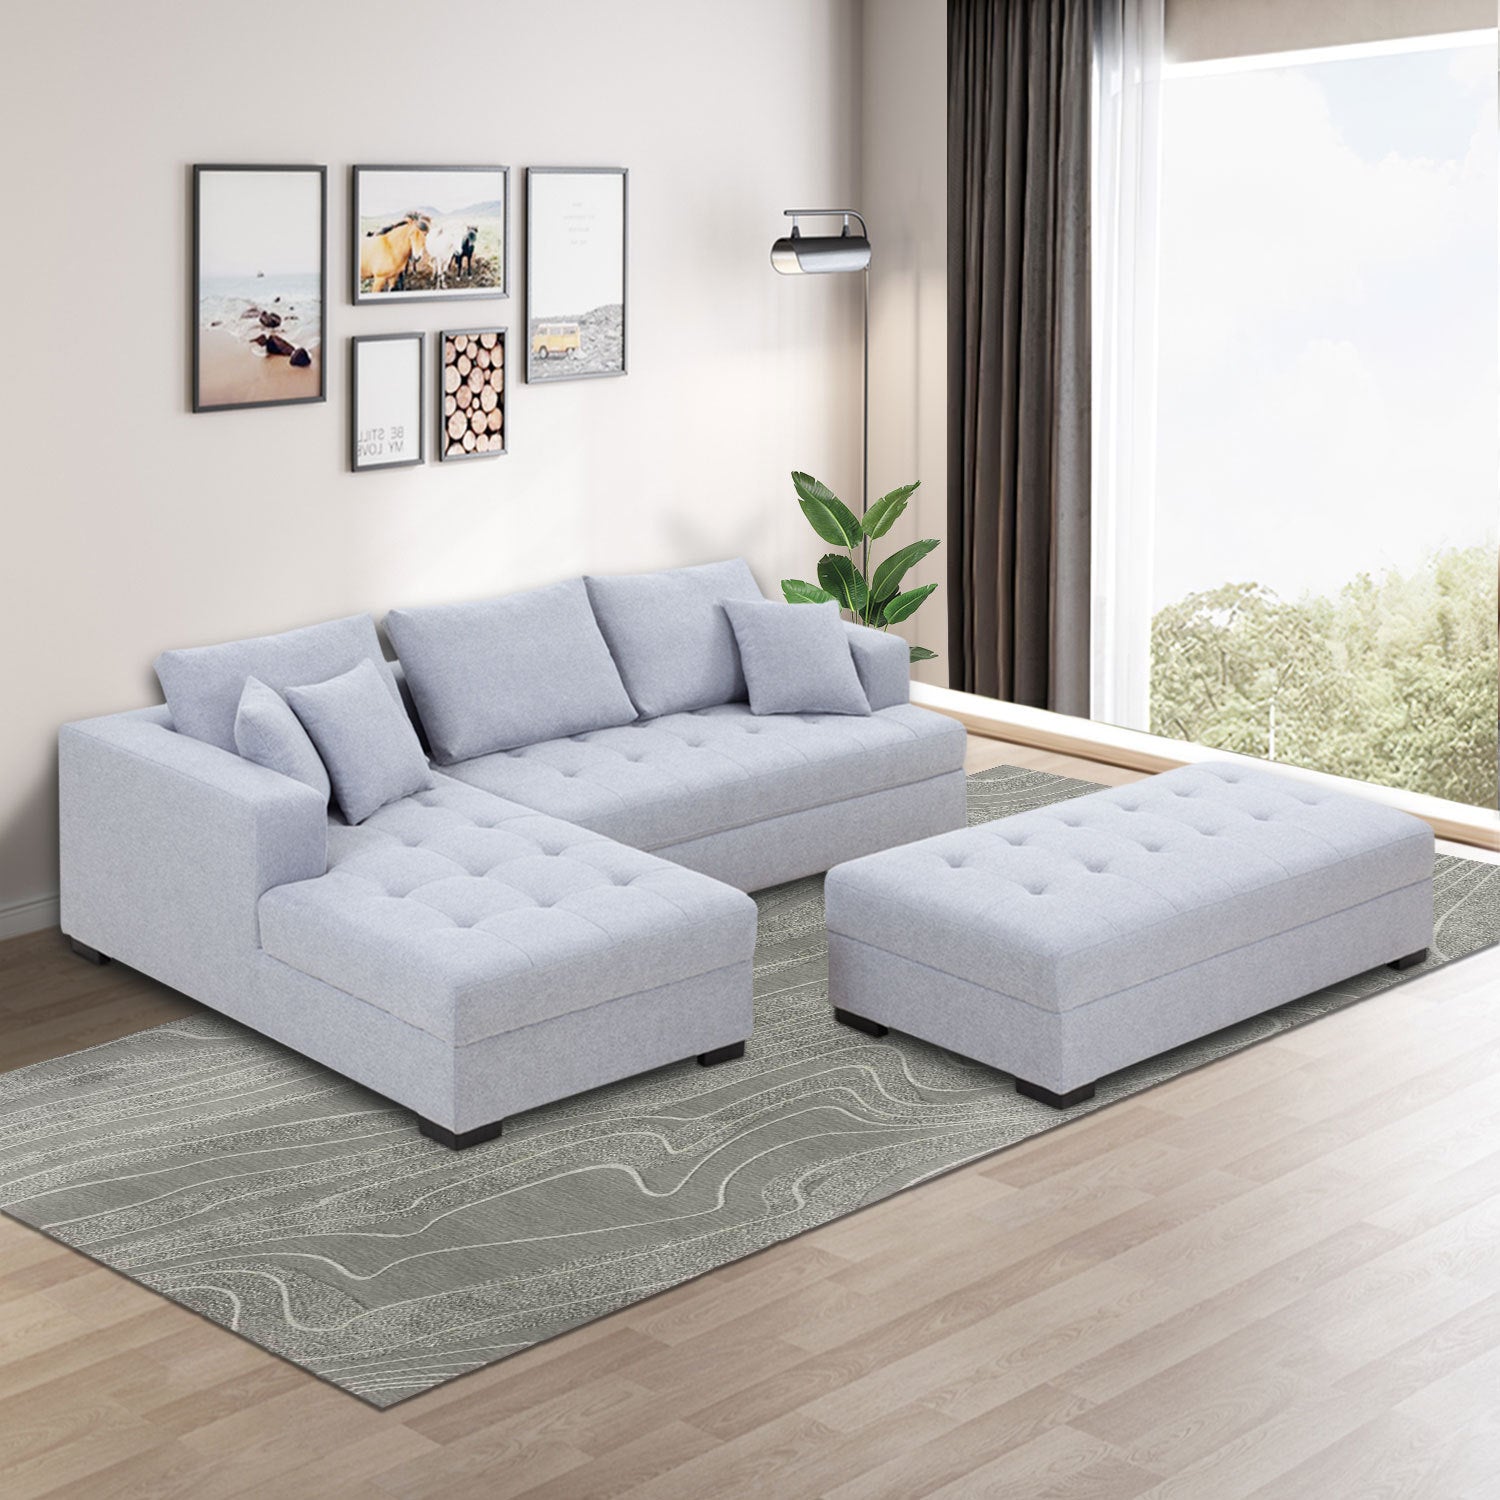 Tufted Fabric 3 Seat L Shape Sectional Sofa Couch Set light grey-fabric